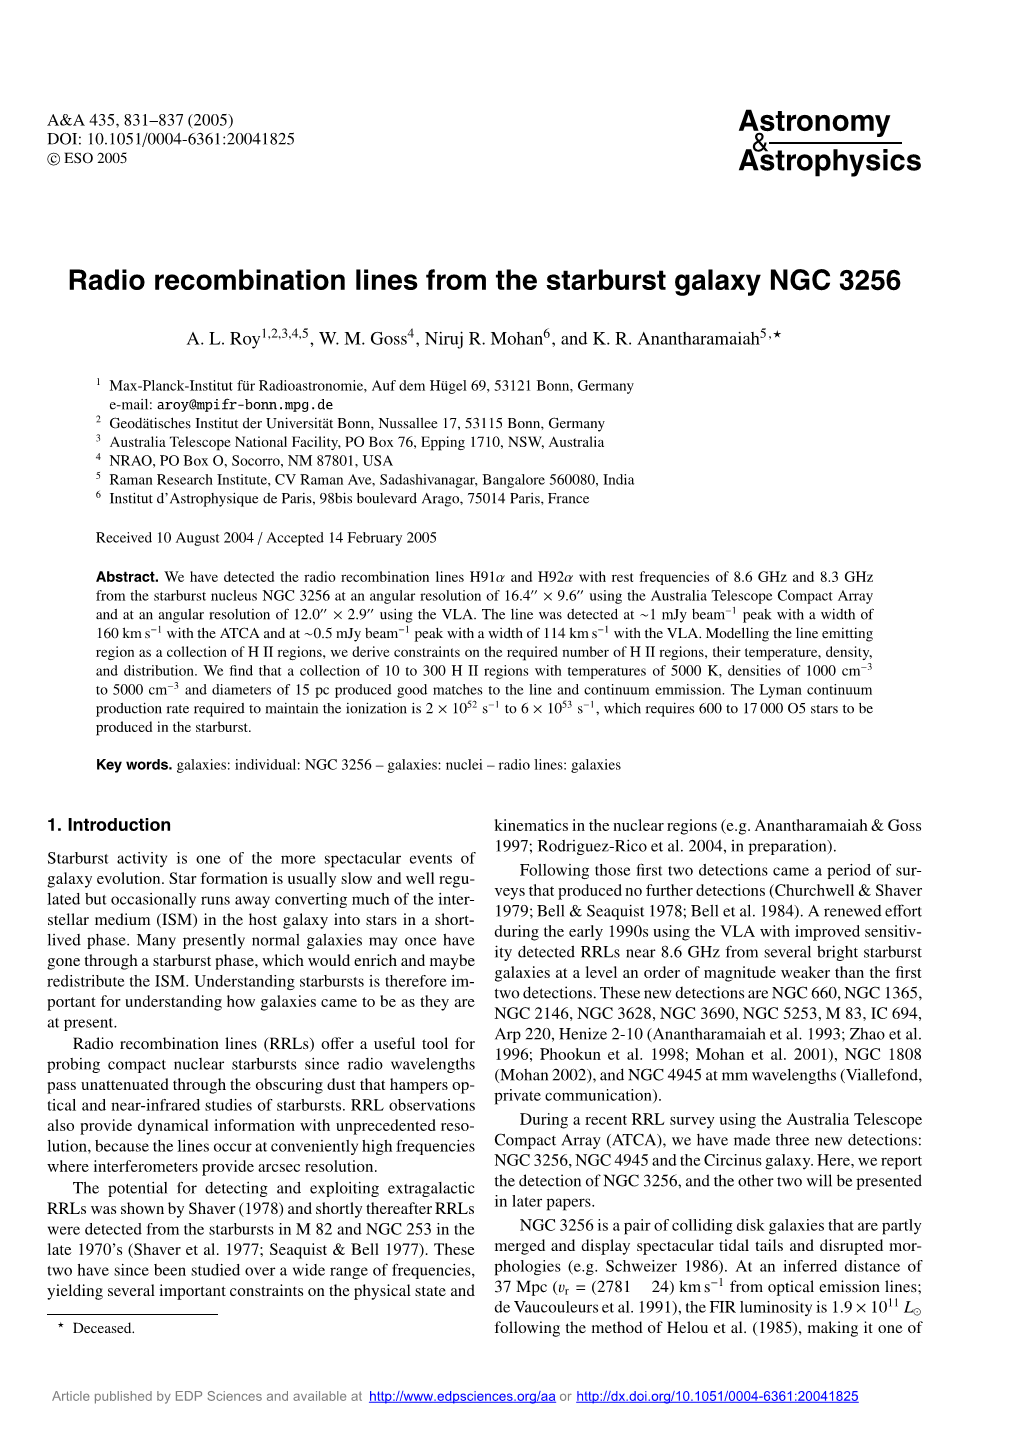 Radio Recombination Lines from the Starburst Galaxy NGC 3256